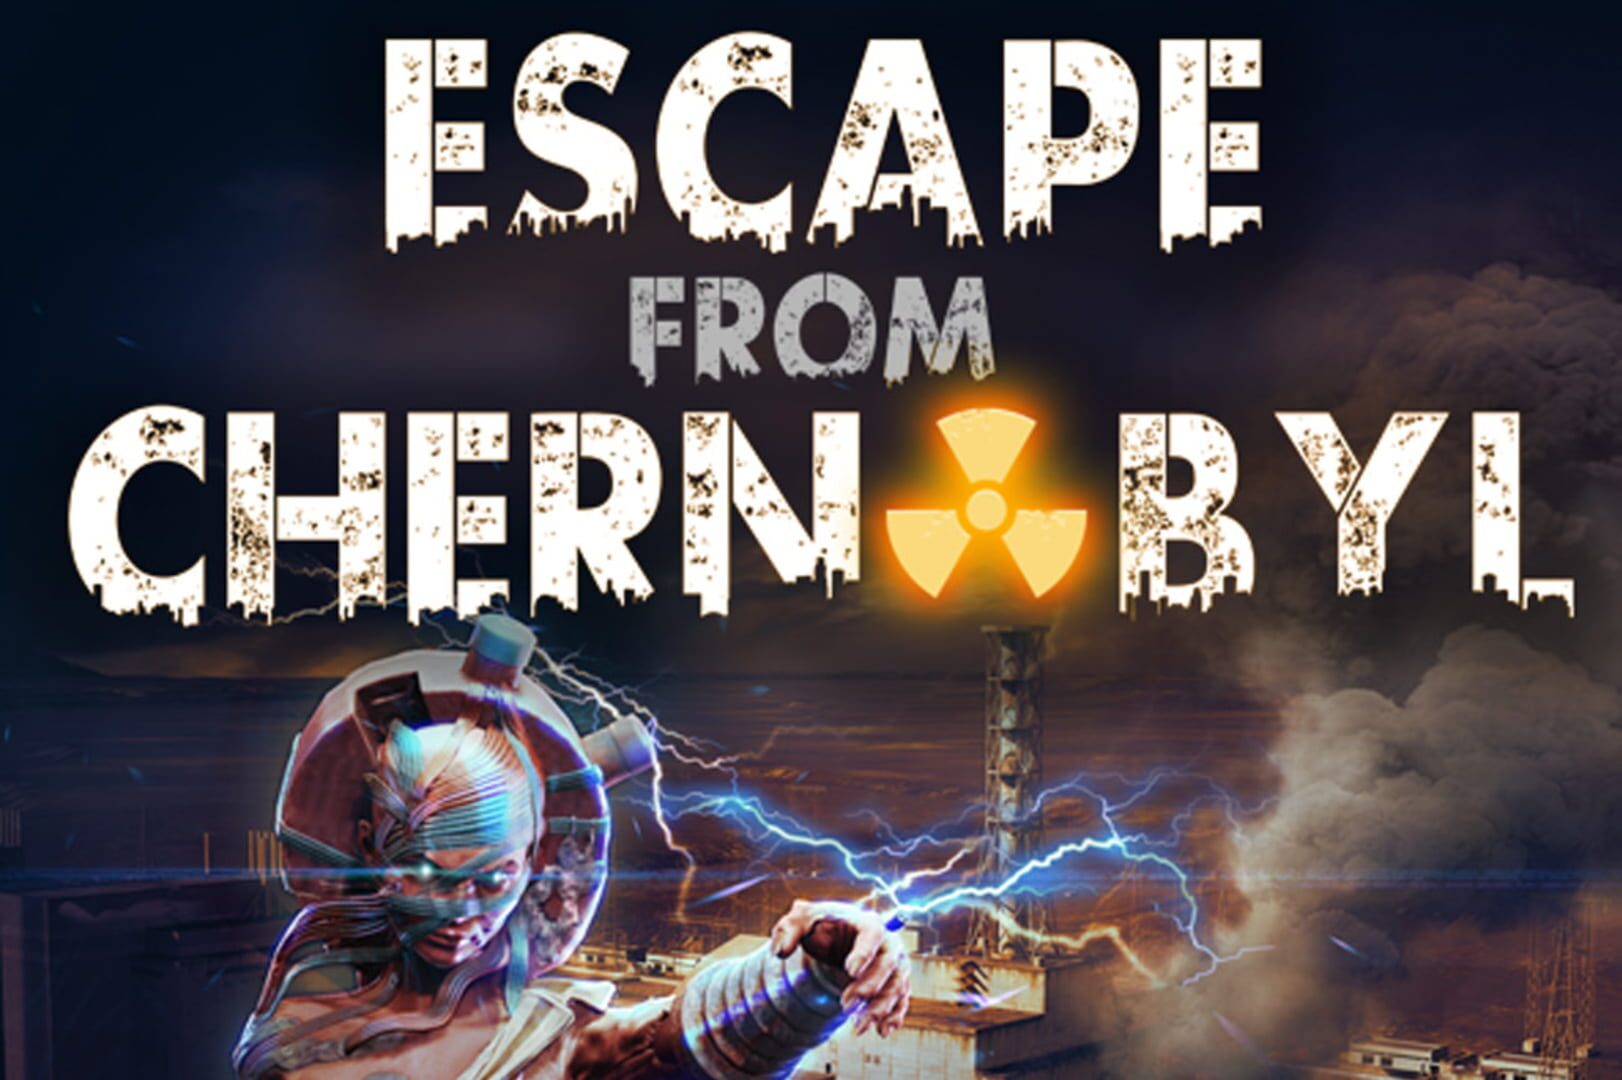 Escape from Chernobyl artwork